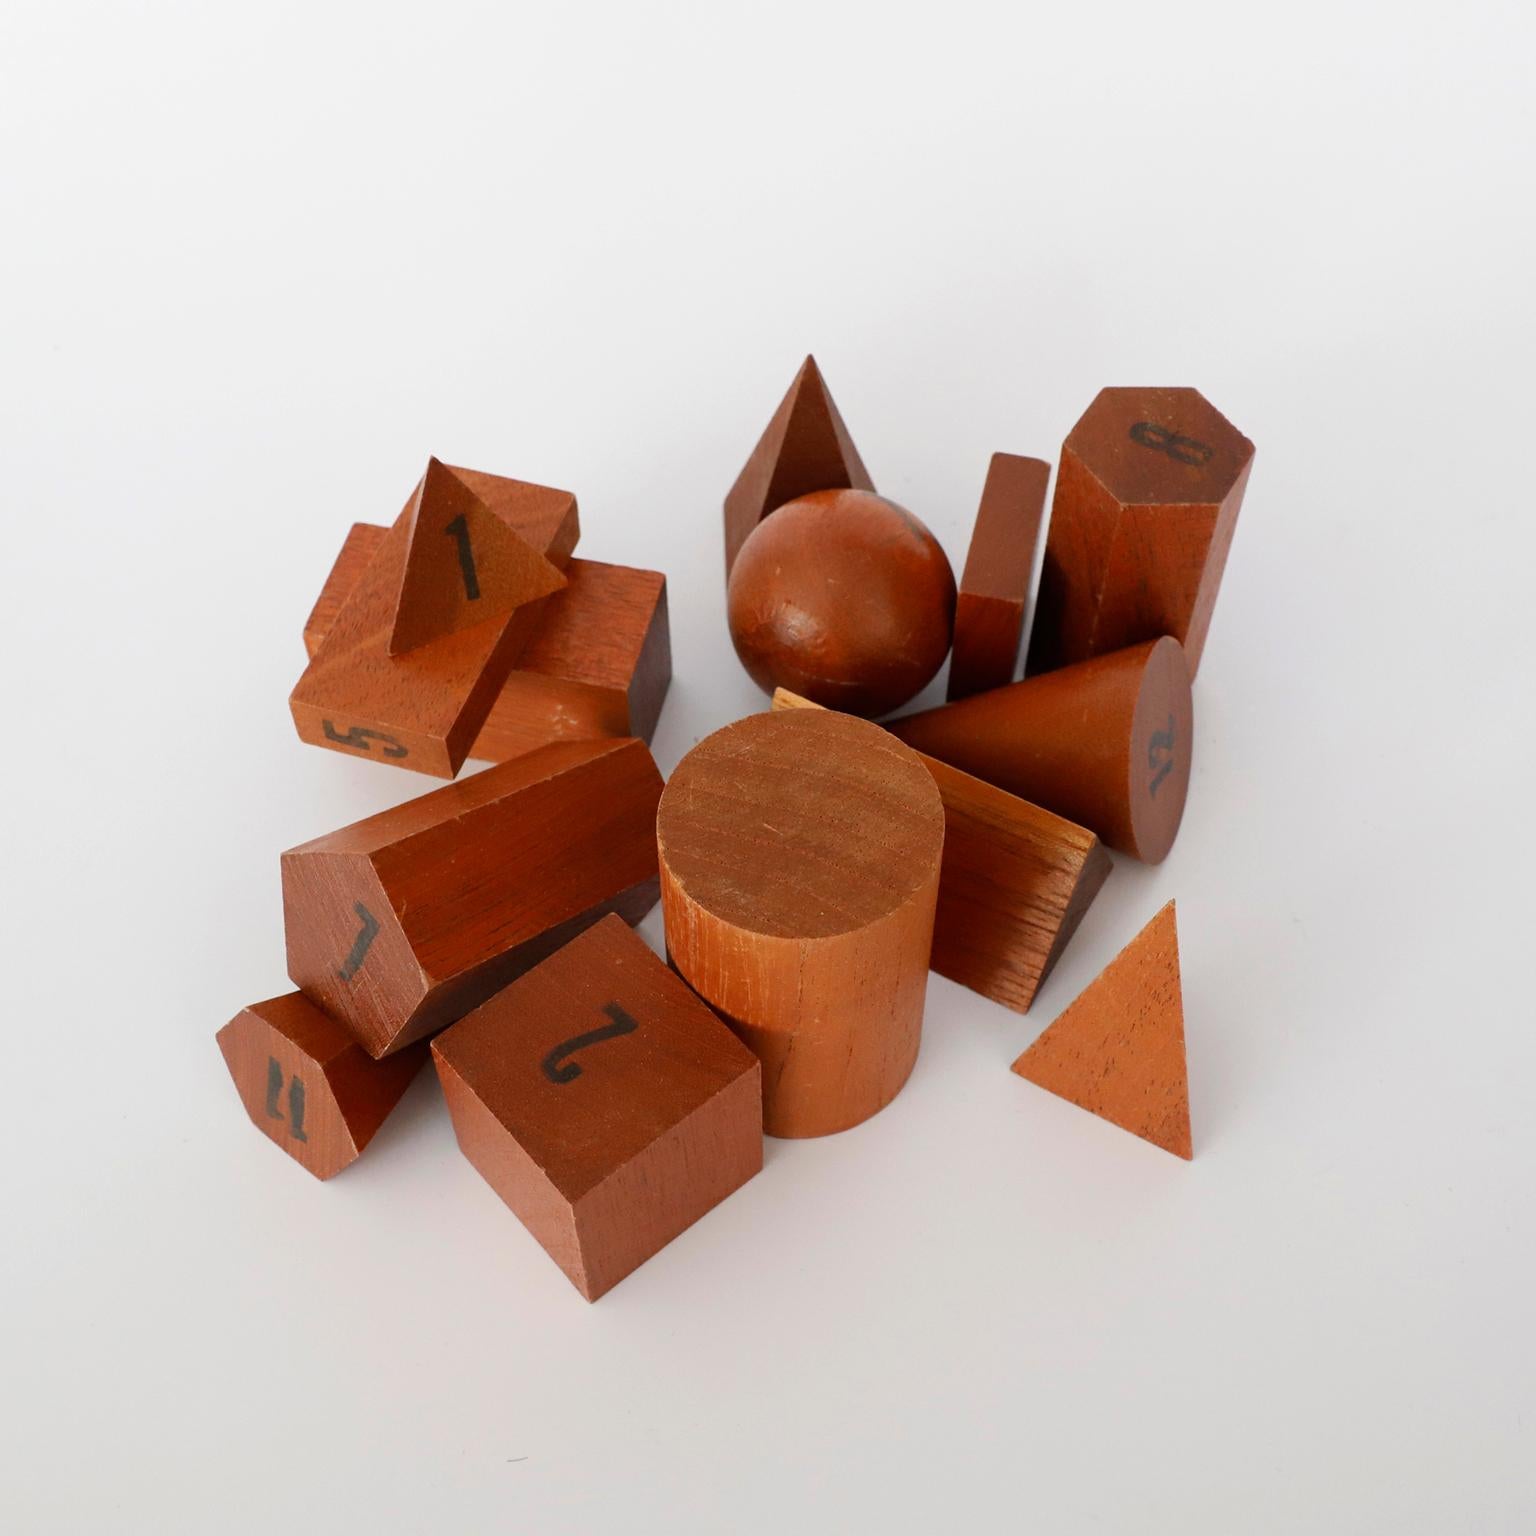 Circa 1970. We offer this set of 14 vintage wooden geometric shapes. These wooden models were used in teaching solid geometry and mathematics, original box.